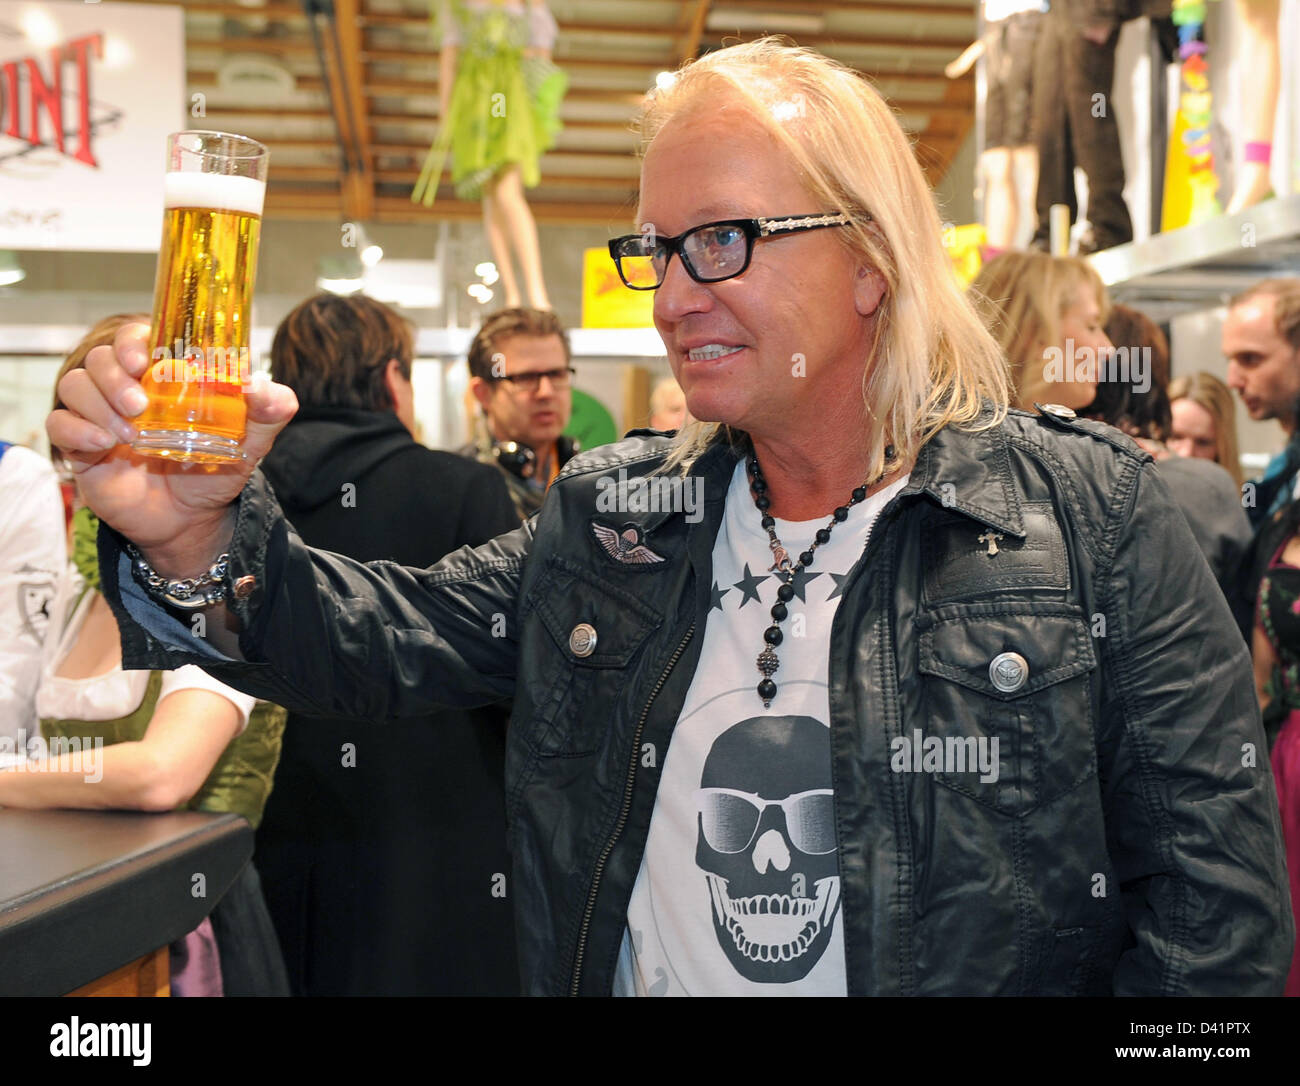 Robert Geiss, known from the television docusoap 'The Geissens', drinks a  beer at the trade fair area in Salzburg, Germany, 01 March 2013. His wife  Carmen Geissen will present her new collection '